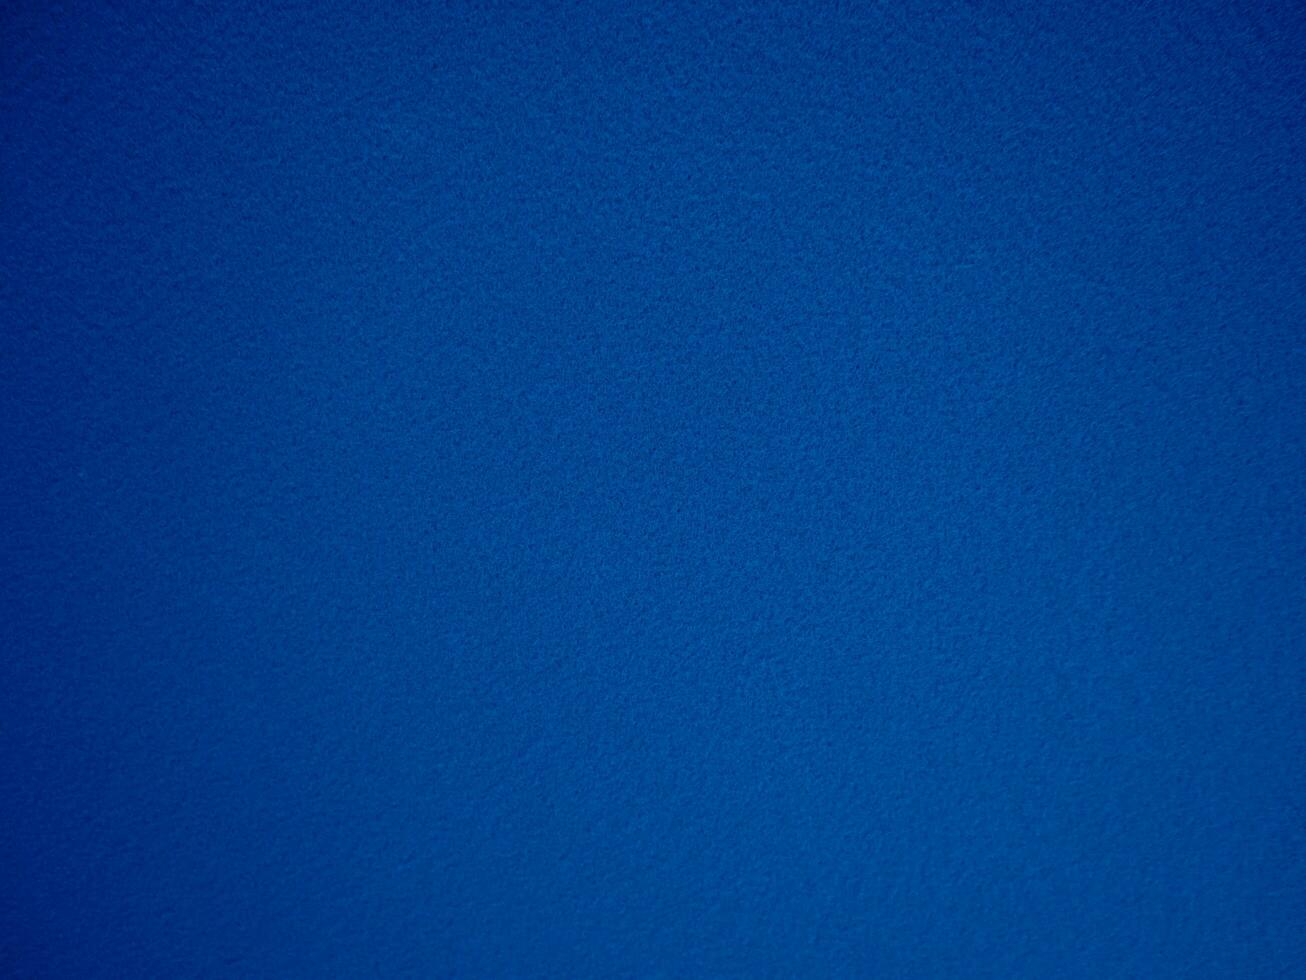 Felt blue soft rough textile material background texture close up,poker table,tennis ball,table cloth. Empty navy blue fabric denim background. photo